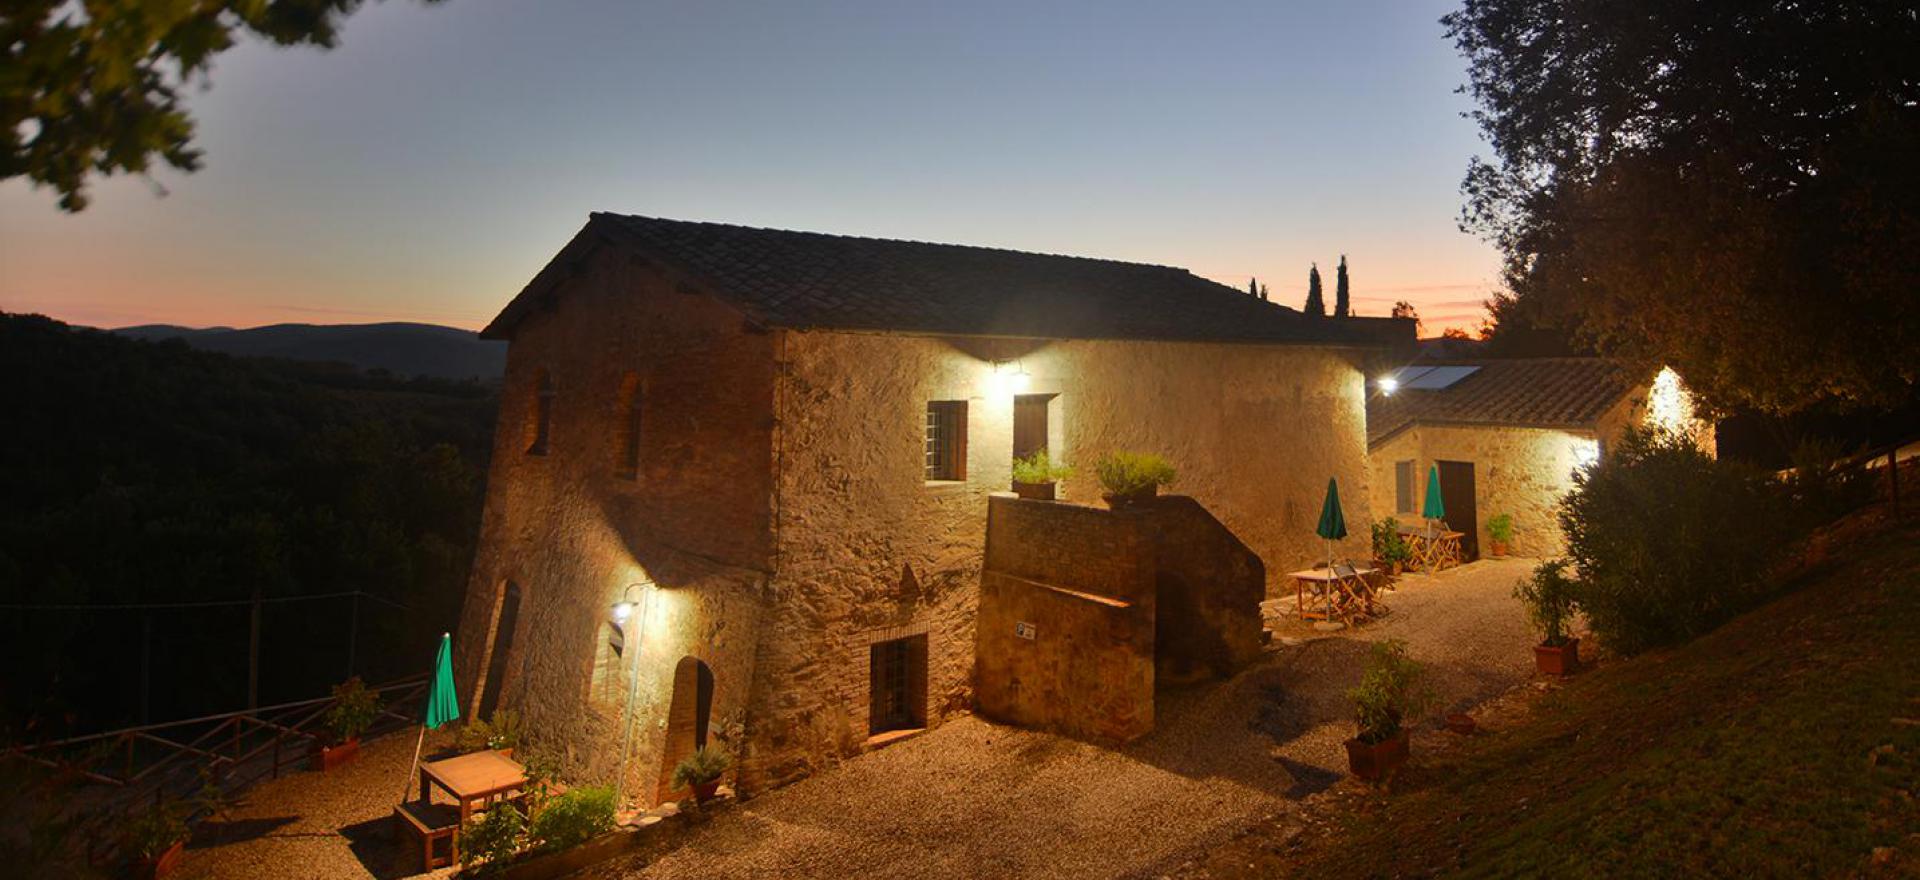 Agriturismo Tuscany Comfortable agriturismo in the unspoilt hills of Siena